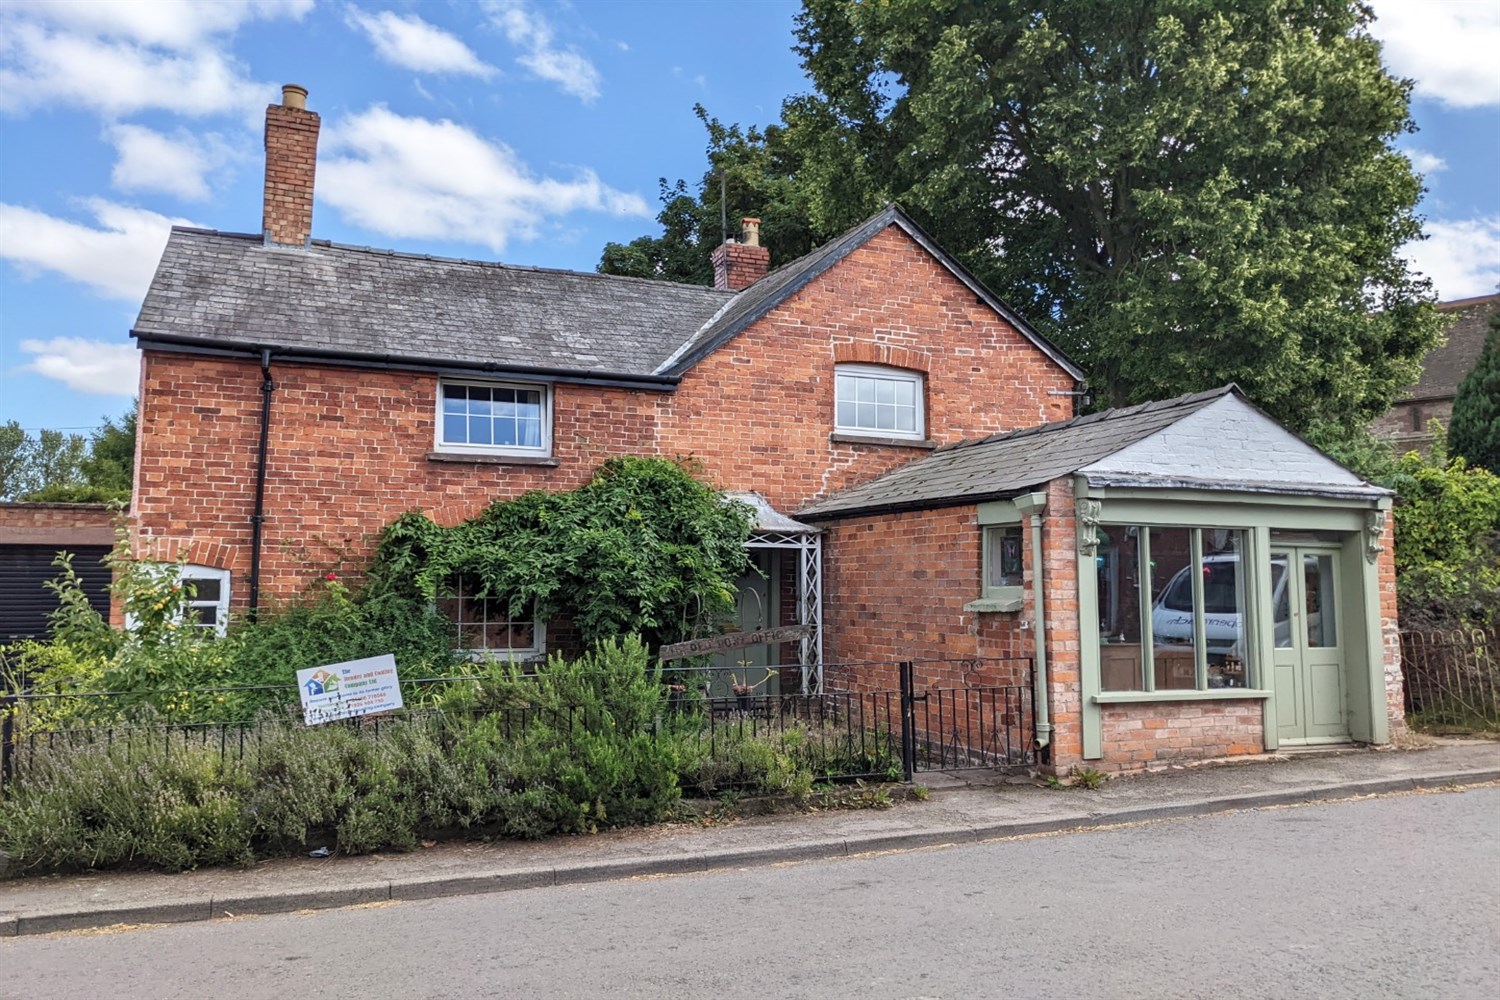 The Old Post Office, Madley, Hereford